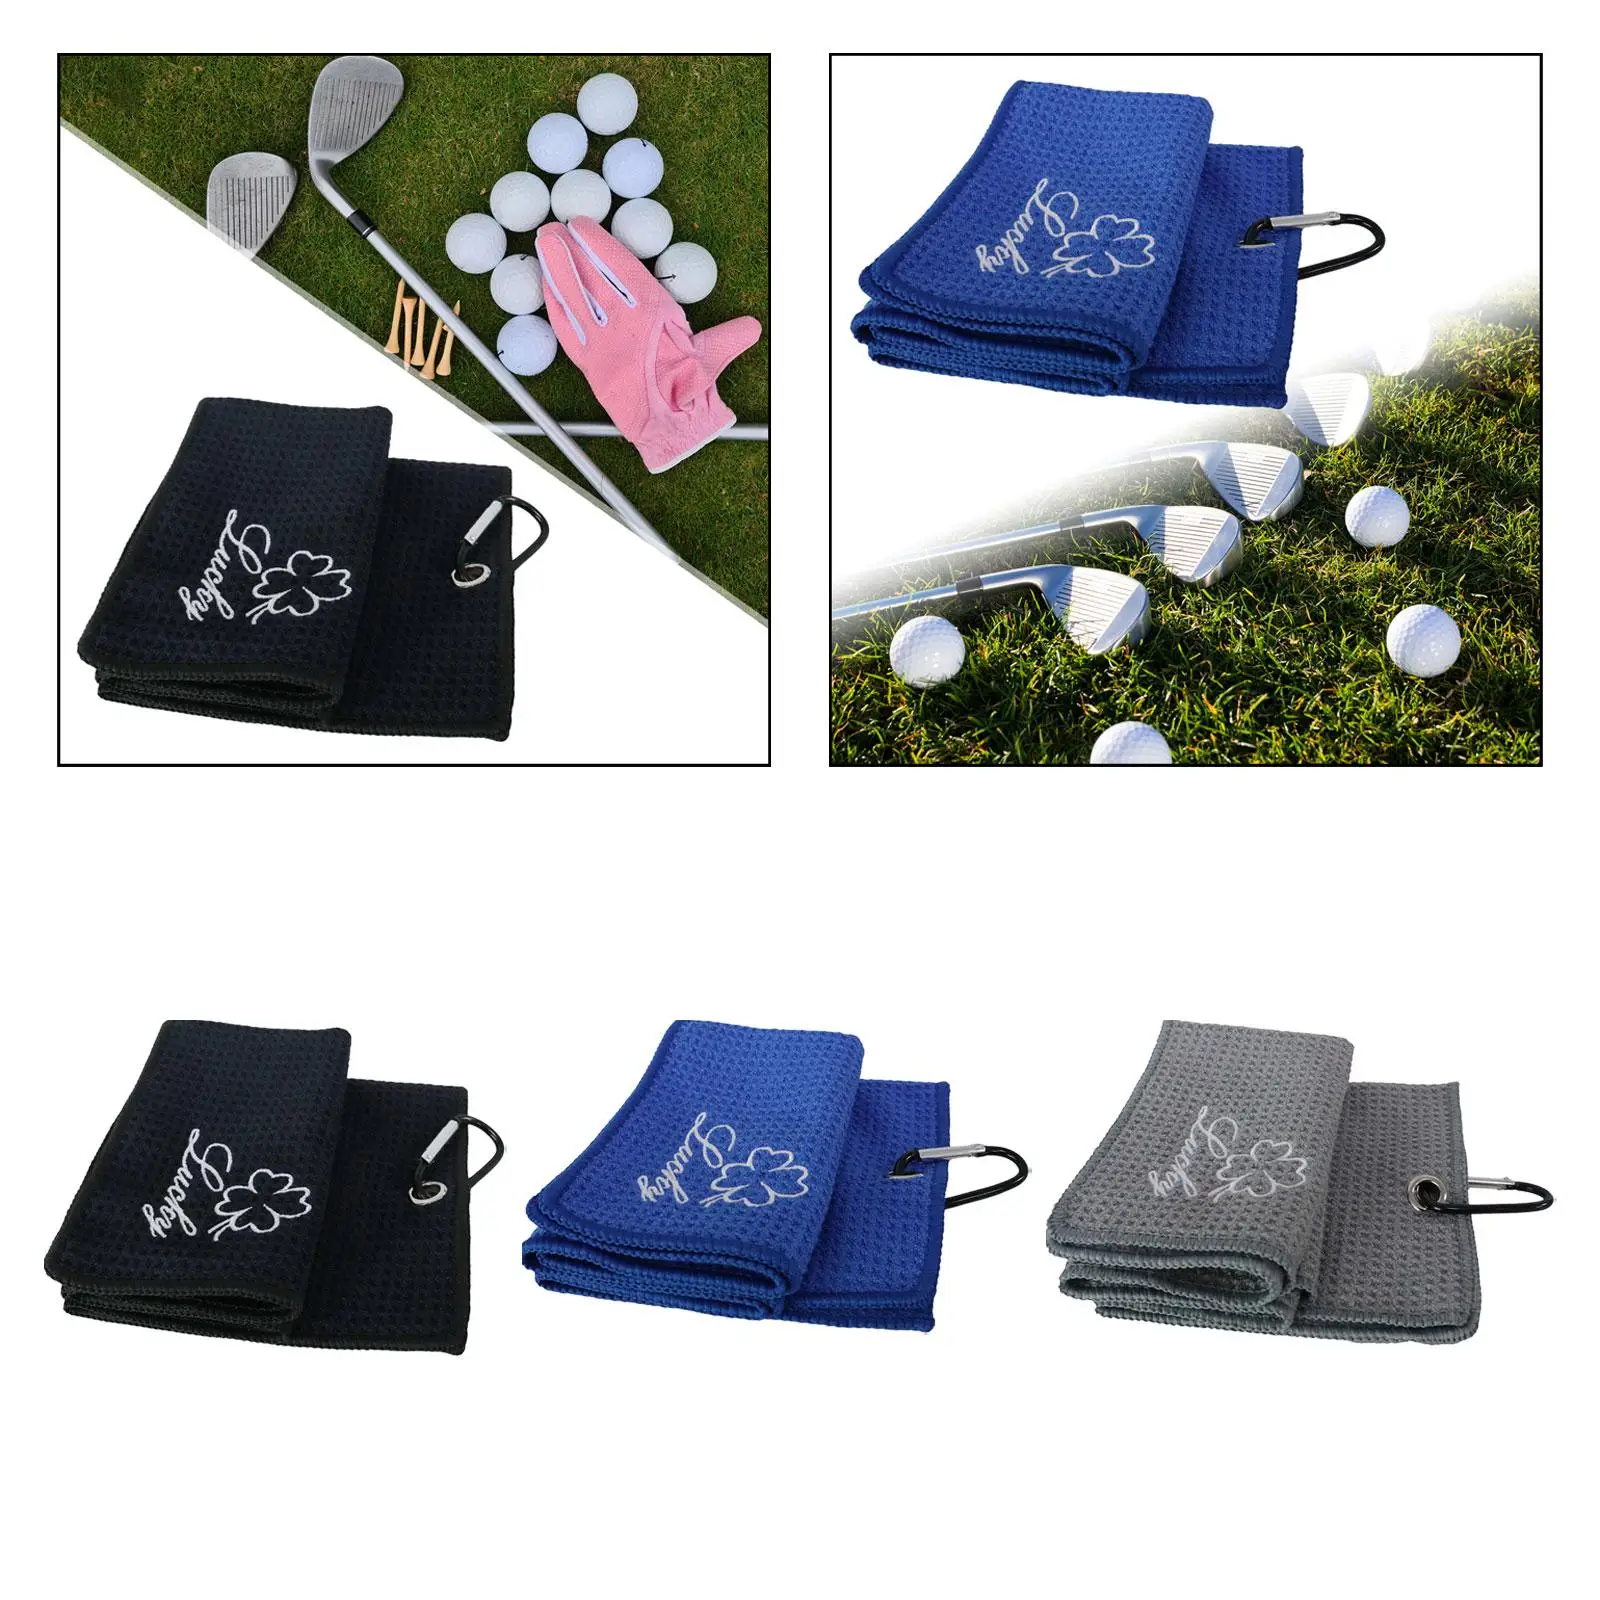 Golf Towel for Golf Bags Breathable Portable Lightweight Golf Cleaning Towel for Workout Training Cycling Outdoor Sports Balls